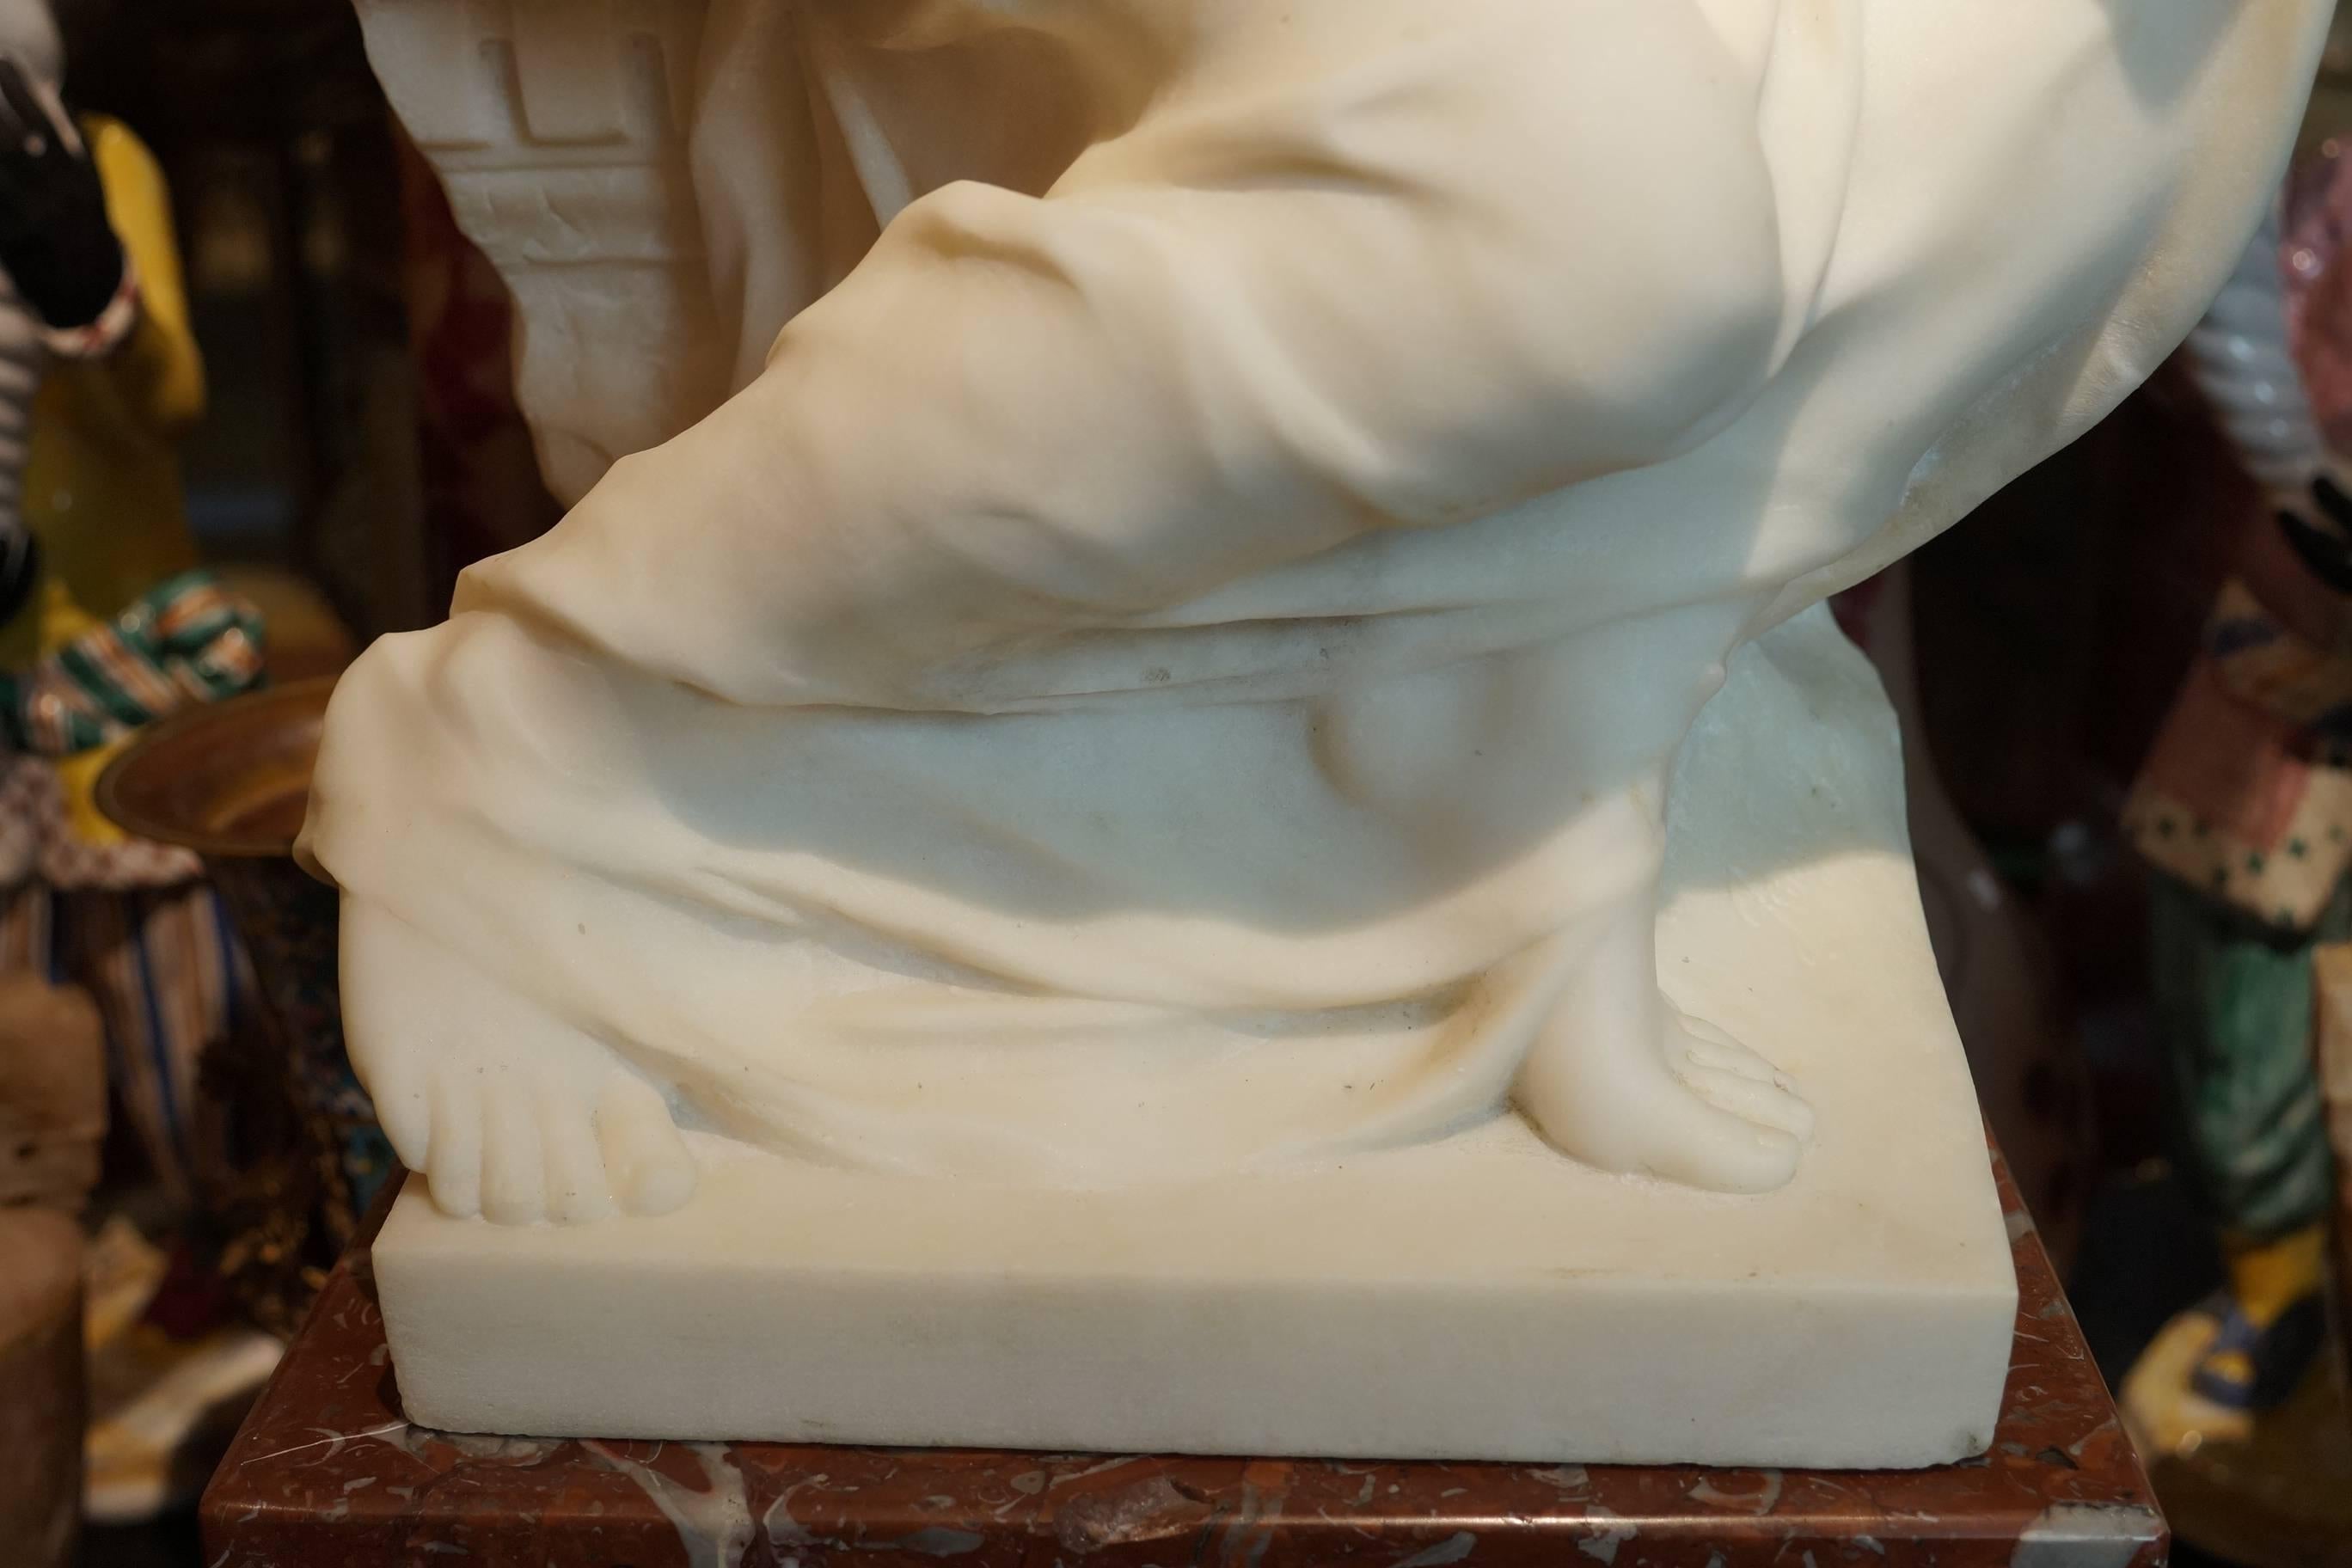 Carved Deco Style Marble Sculpture of a Seated Woman on Bench by George Bareau